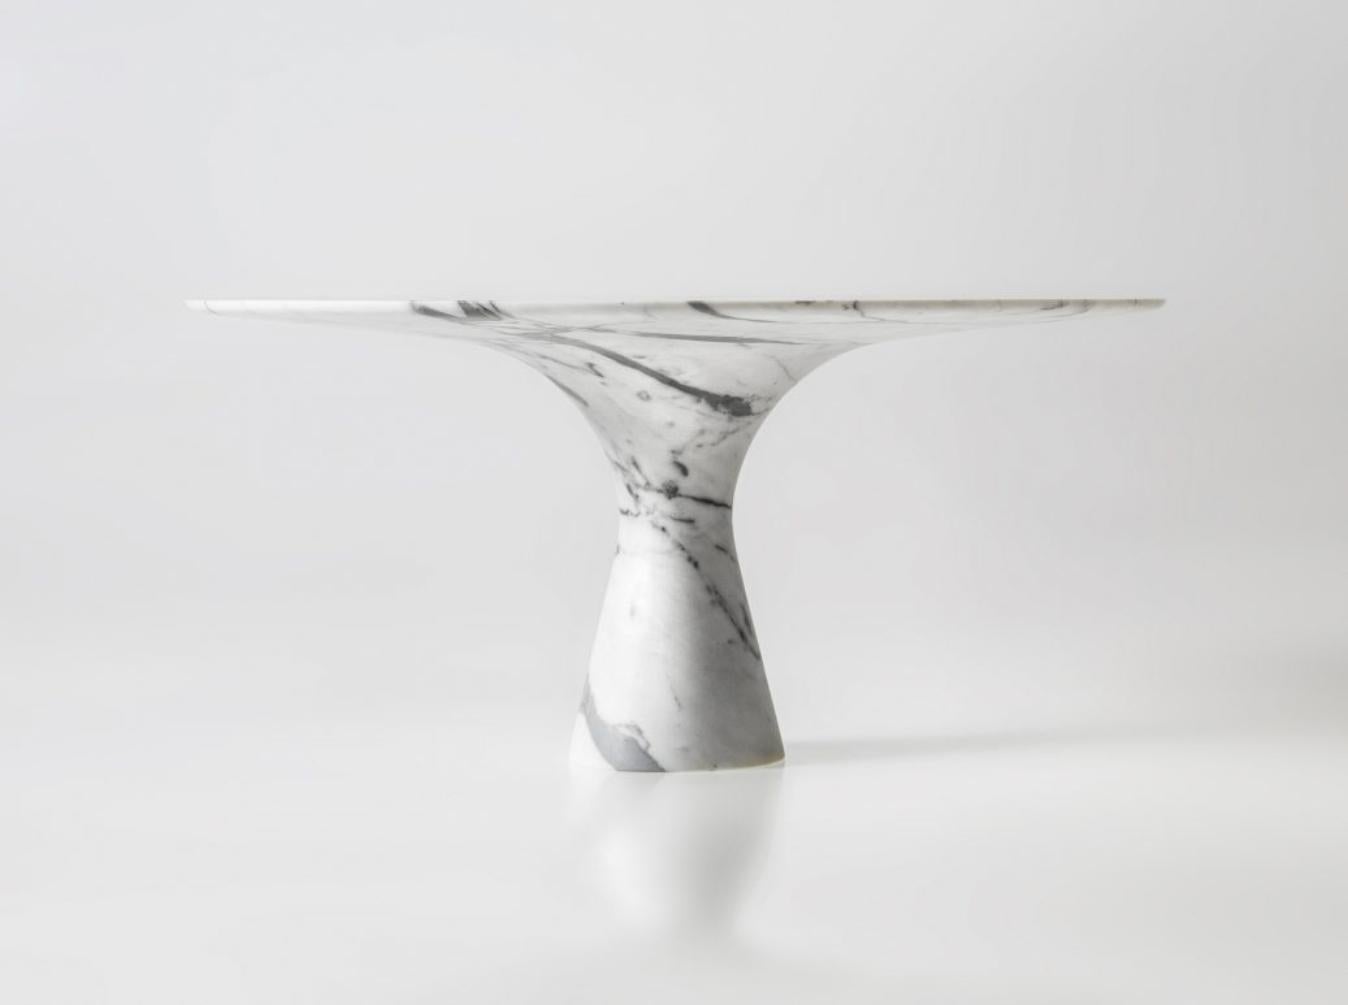 Bianco Statuarietto Refined Contemporary Marble Dining Table 160/75
Dimensions: 160 x 75 cm
Materials: Bianco Statuarietto
Angelo is the essence of a round table in natural stone, a sculptural shape in robust material with elegant lines and refined